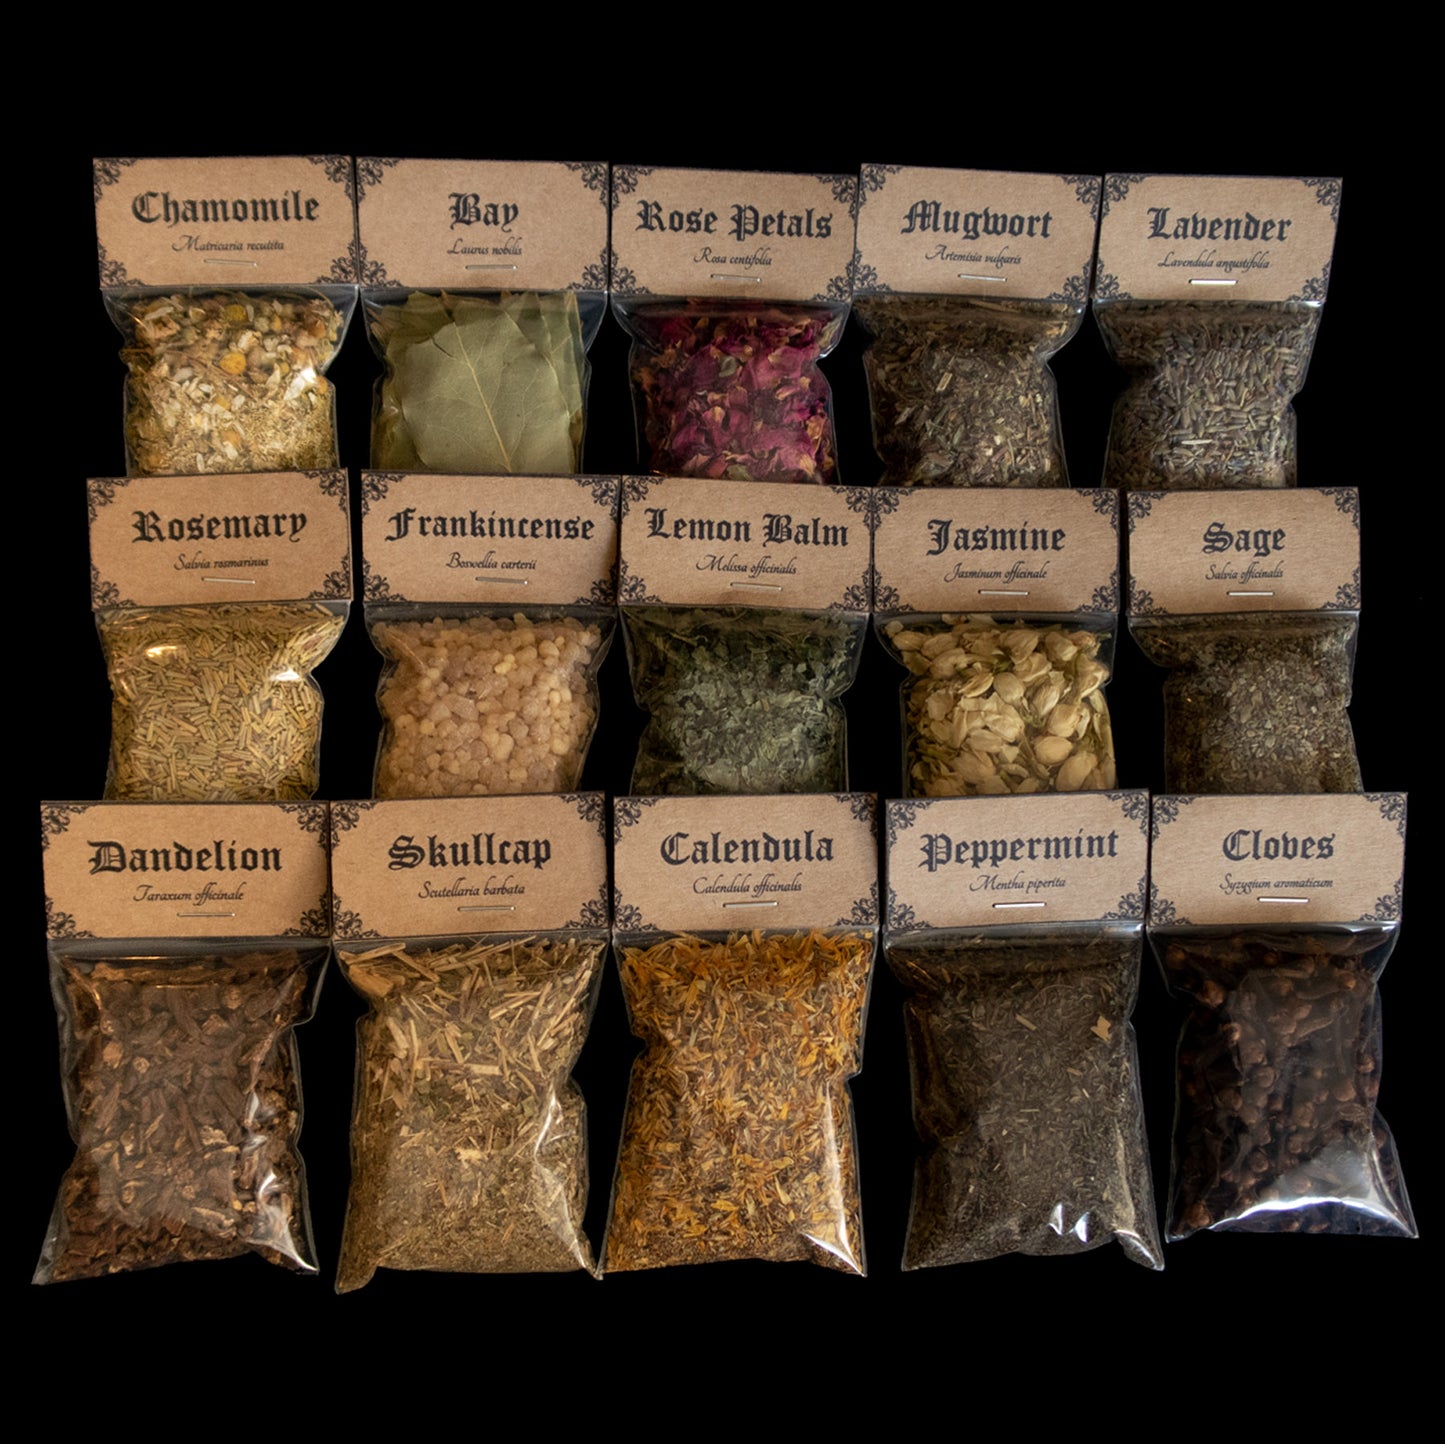 Large Botanical Favourites kit: A collection of 15 bags of herbs - Victorian-apothecary-style brown labels at the top give the common and Latin names